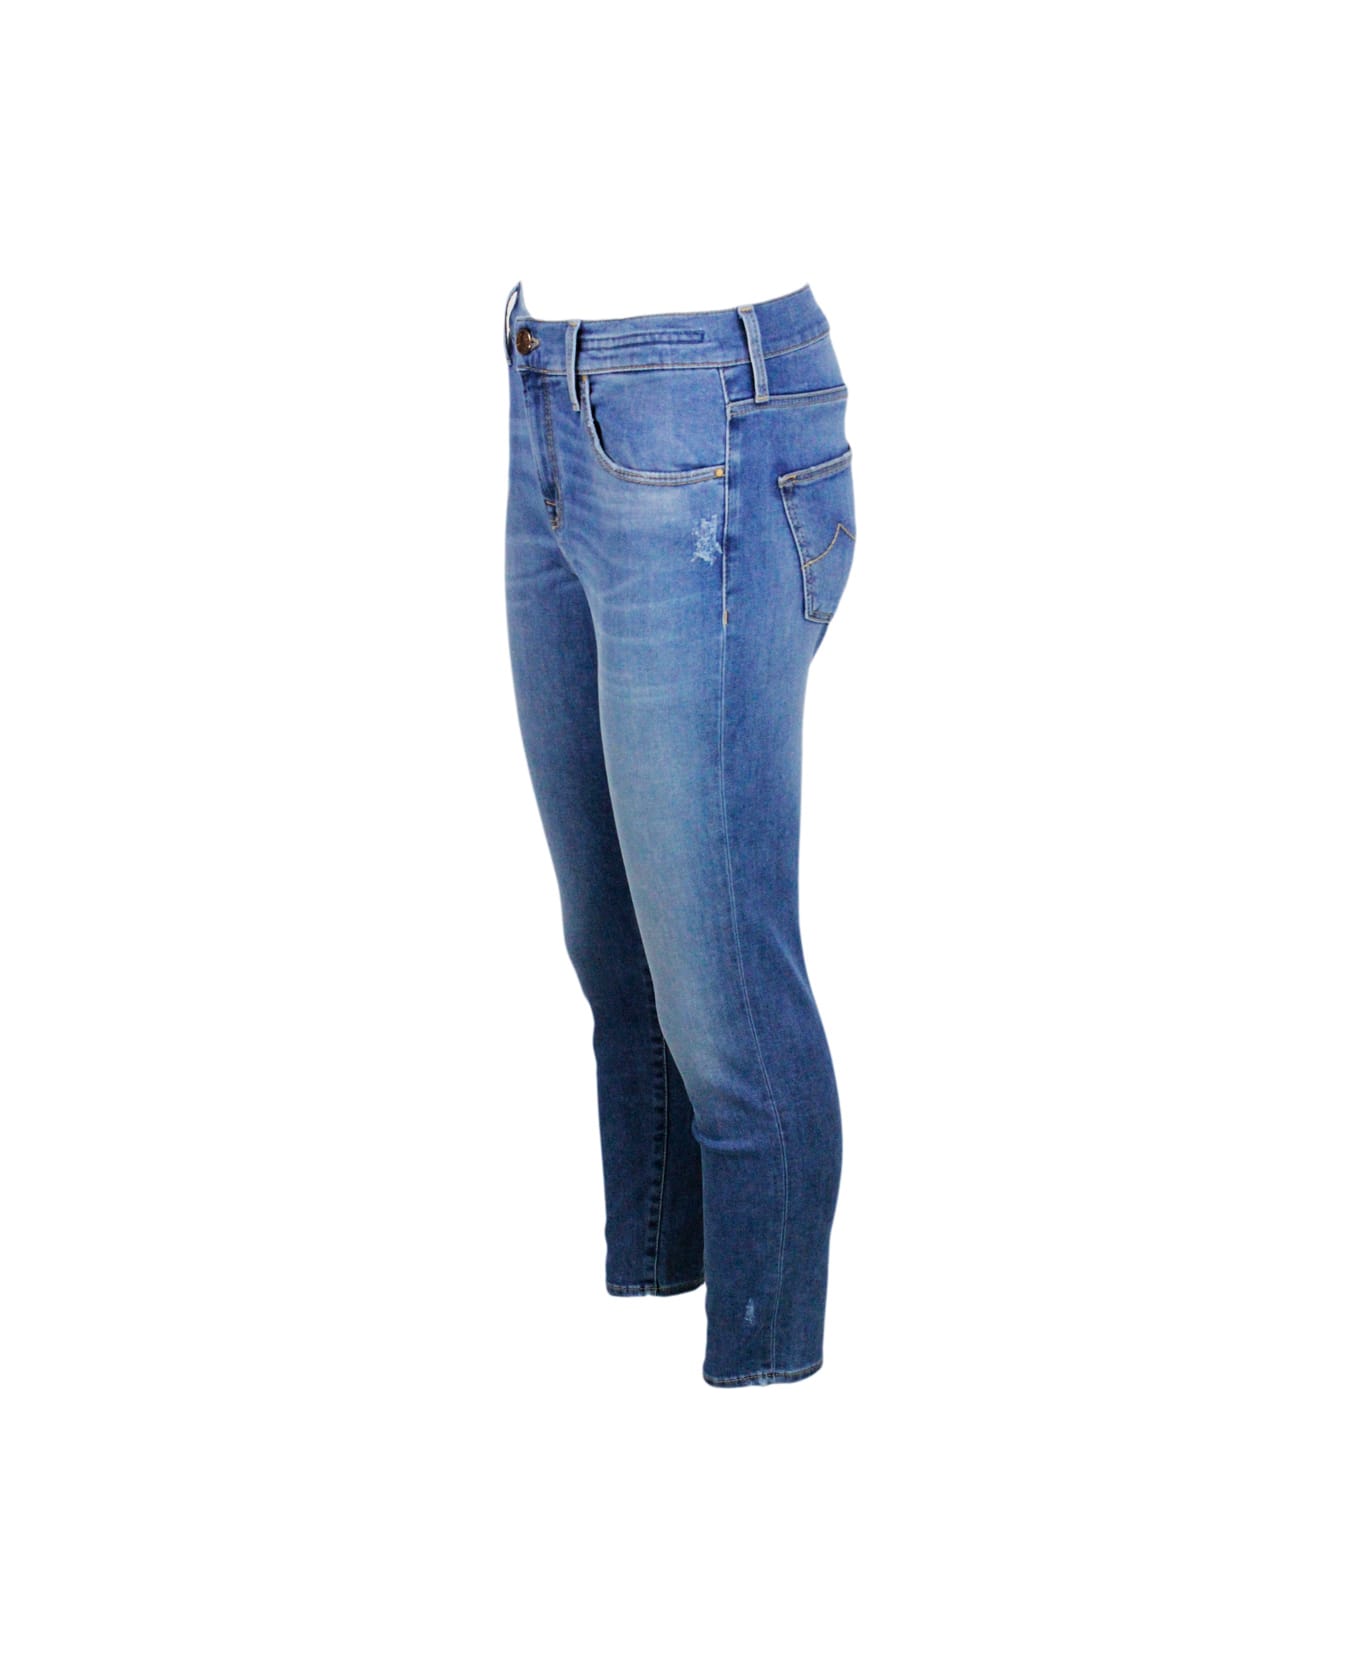 Jacob Cohen Light Jeans In 5-pocket Stretch Denim With Slim Fit At The Ankle With Zip Closure And Tears - Denim ボトムス